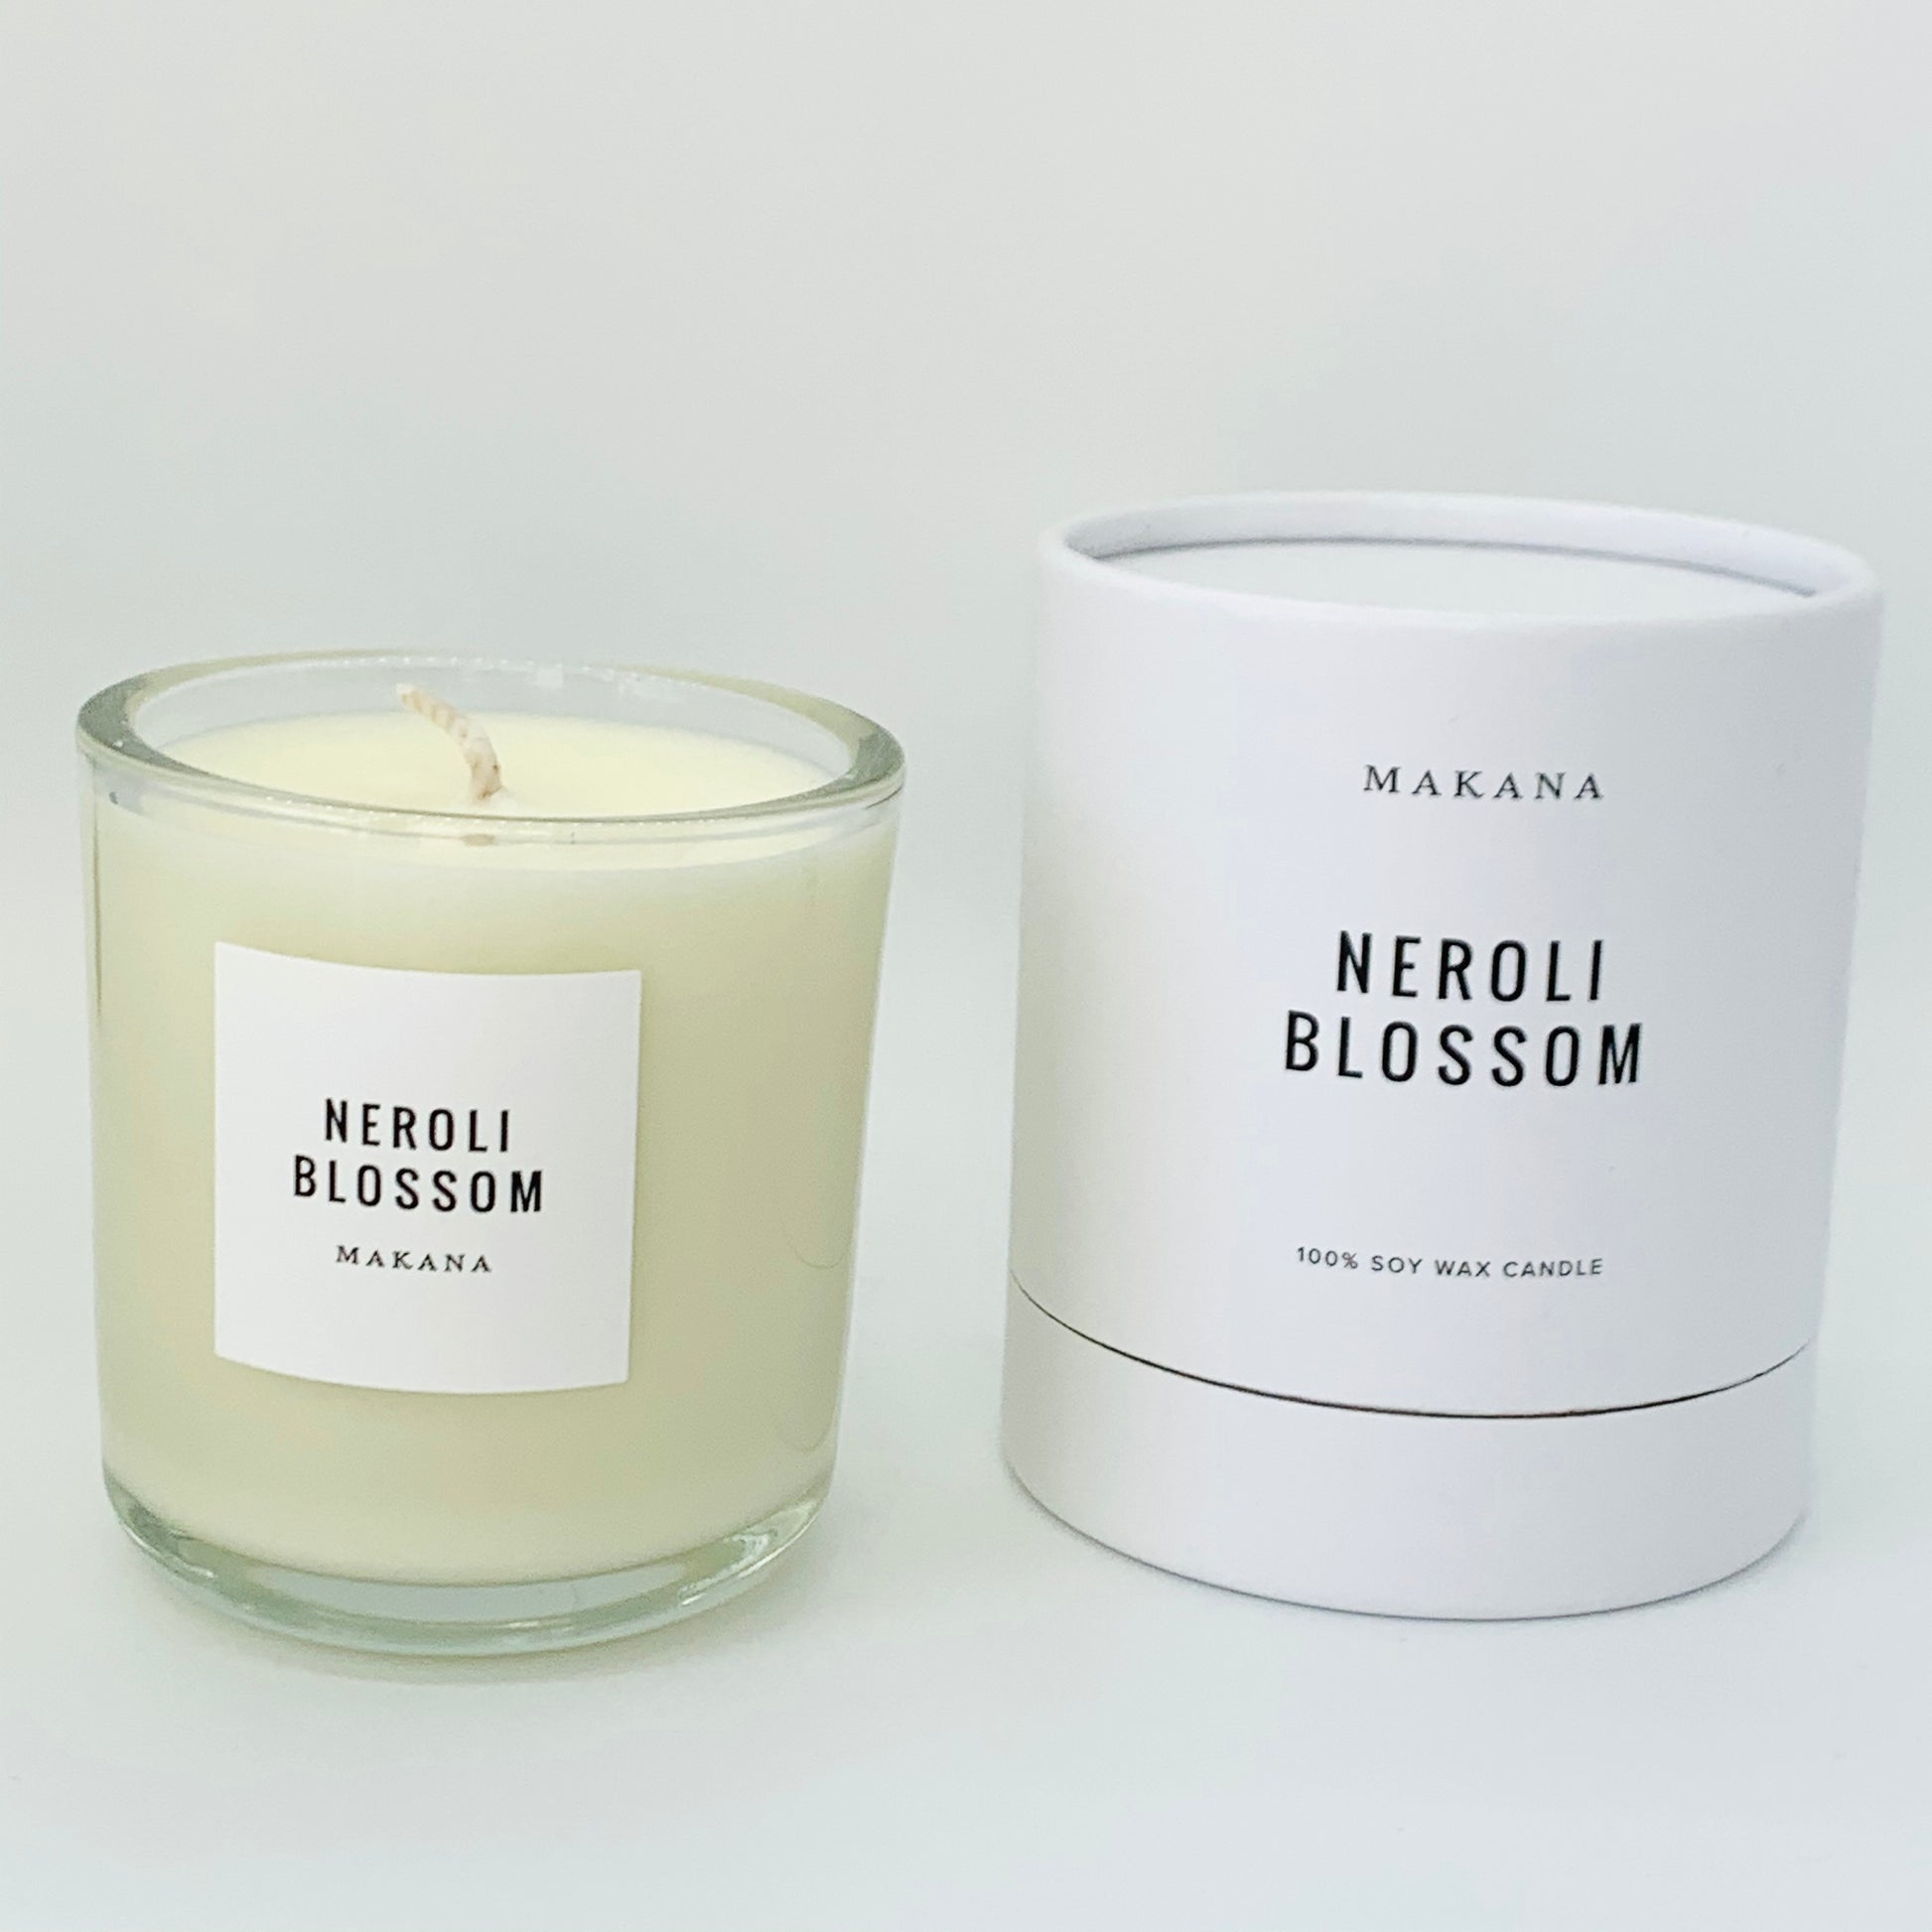 Neroli Blossom Candle = glass jar with white label black writing.  packaged candle in background